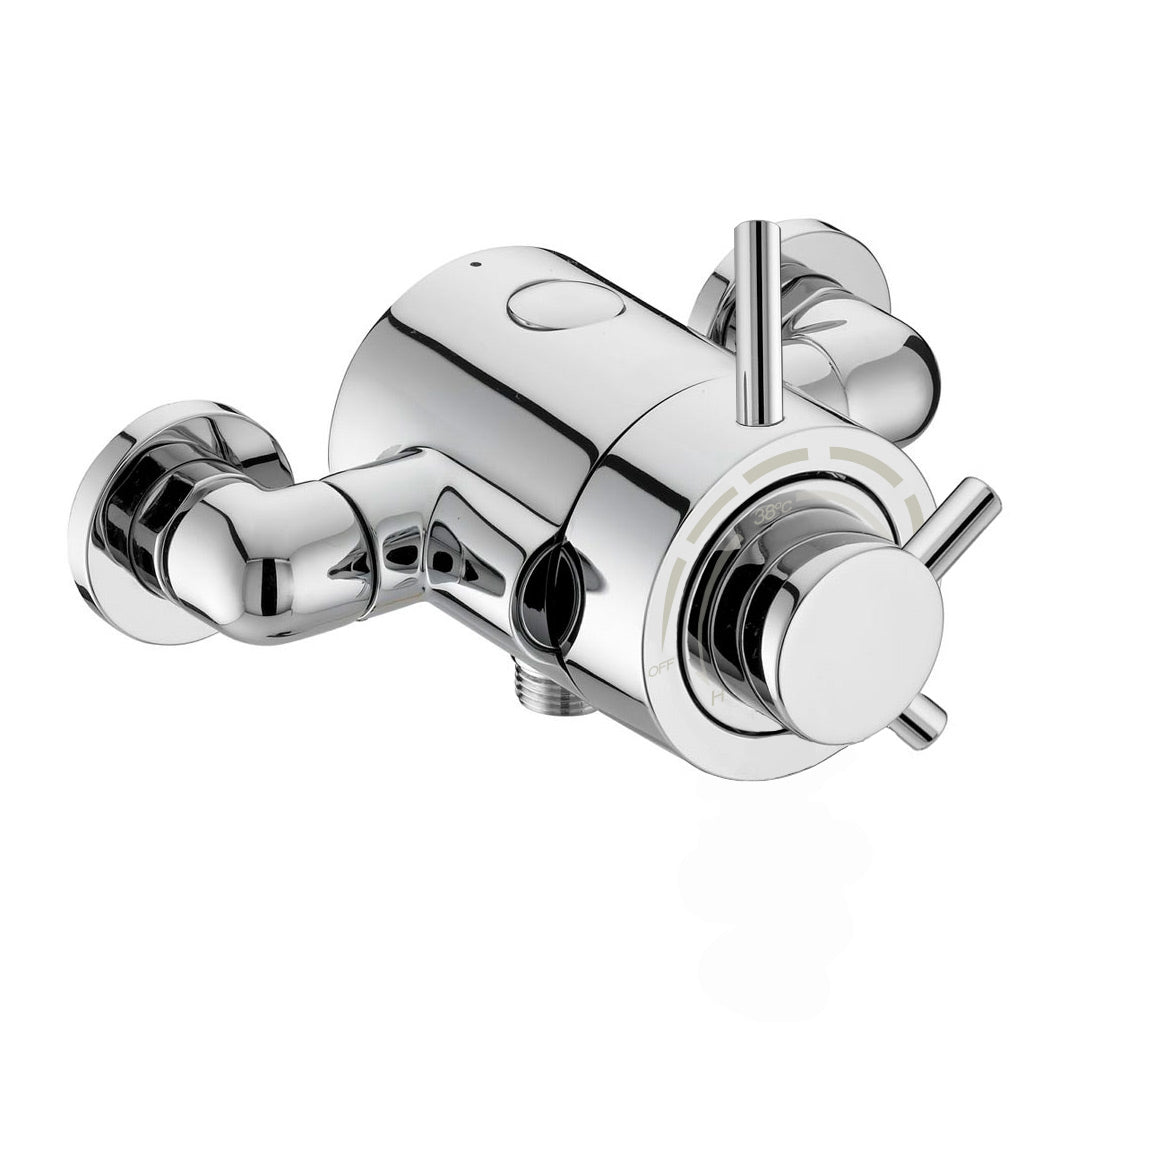 Emso Round Exposed Thermostatic Shower Valve With Bottom Outlet